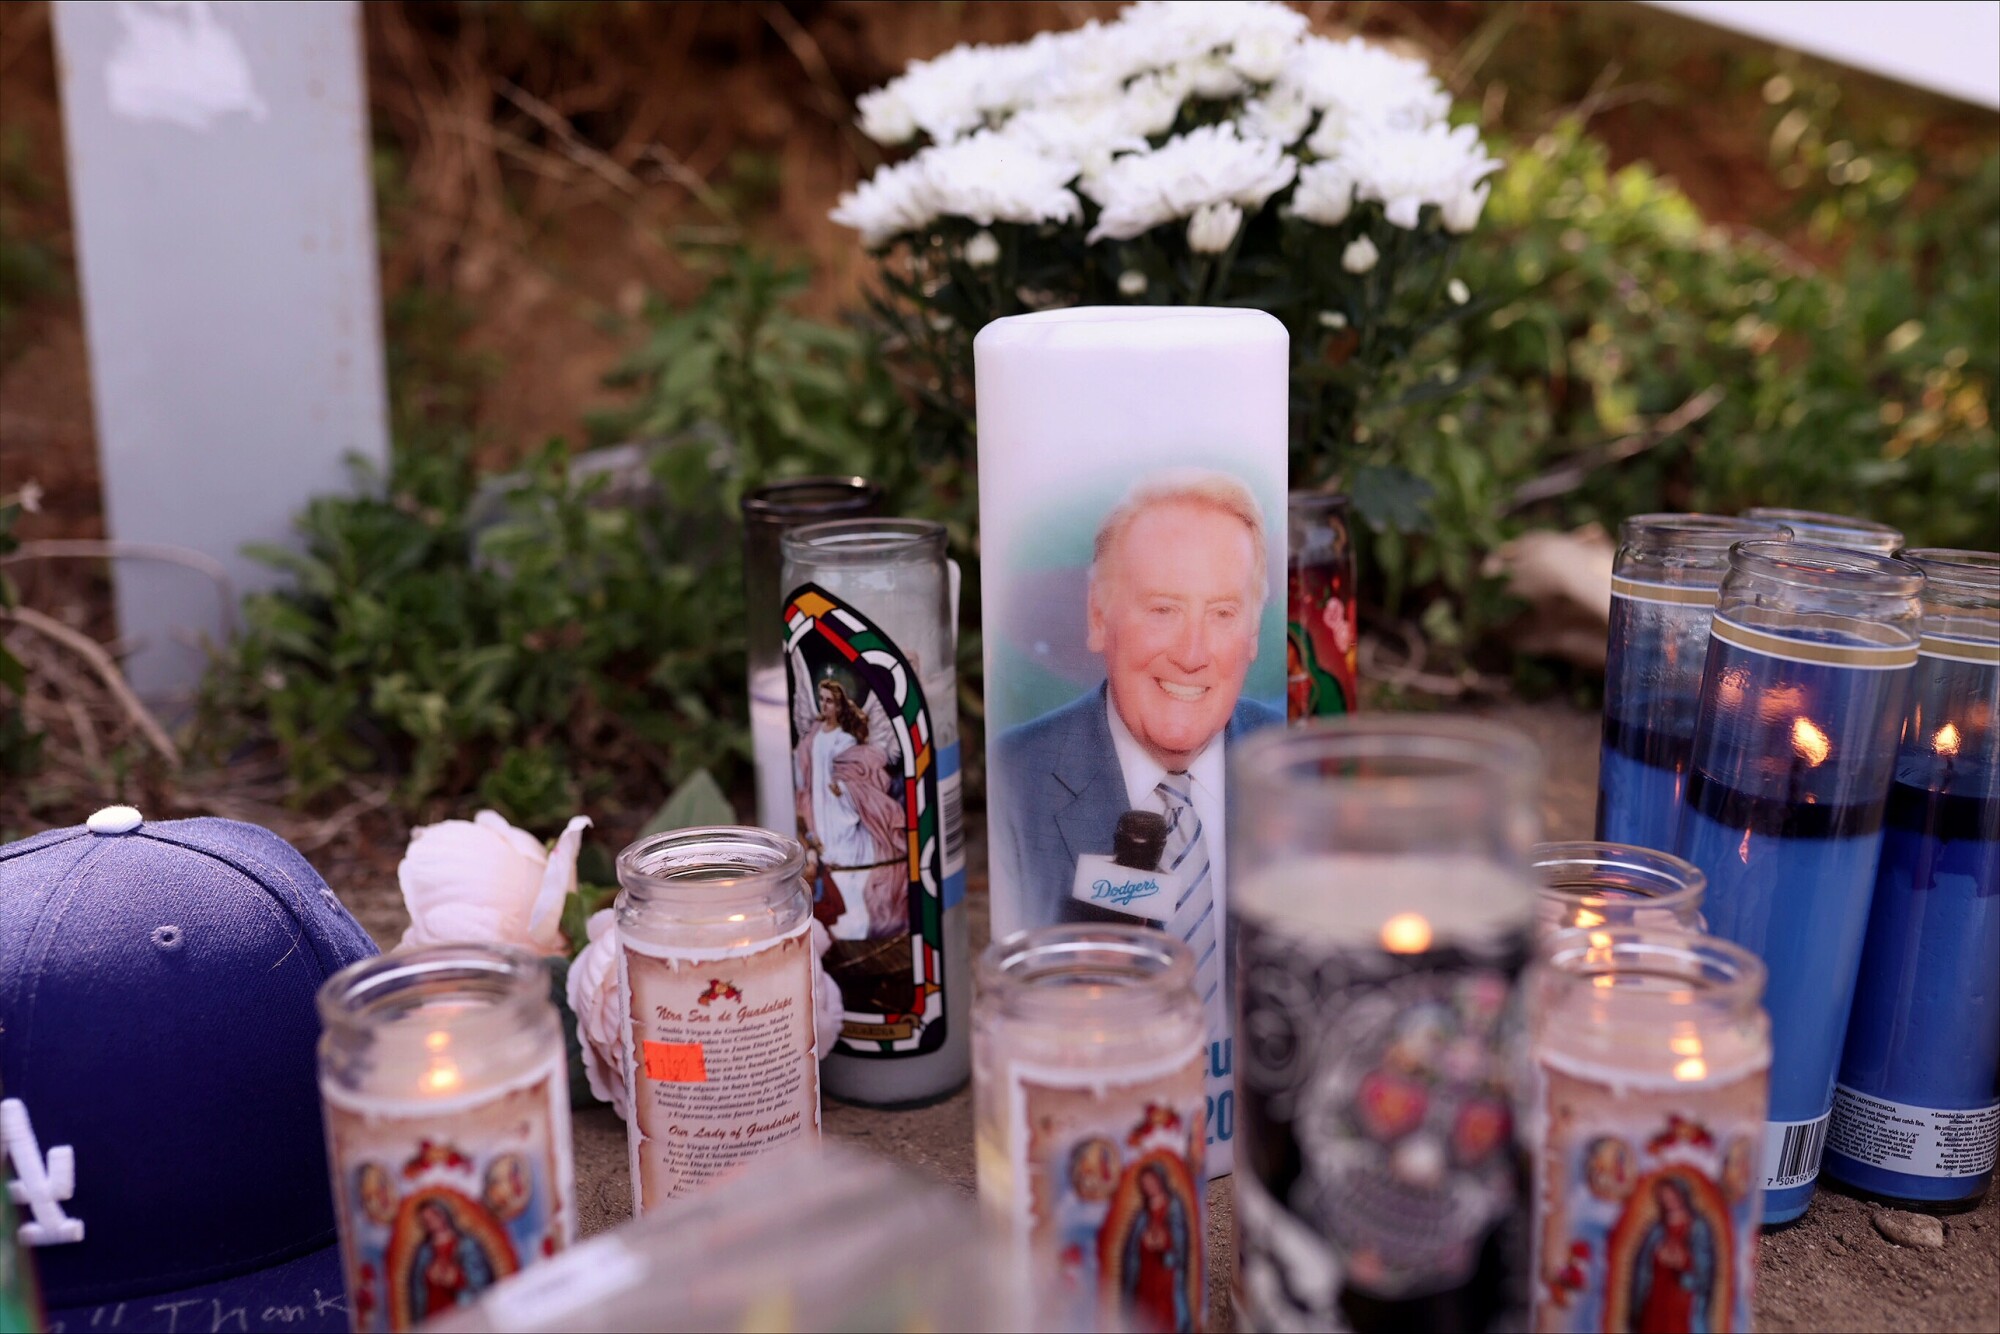 Candles are lit at a growing monument outside Dodger Stadium to legendary Los Angeles Dodgers broadcaster Vin Scully.